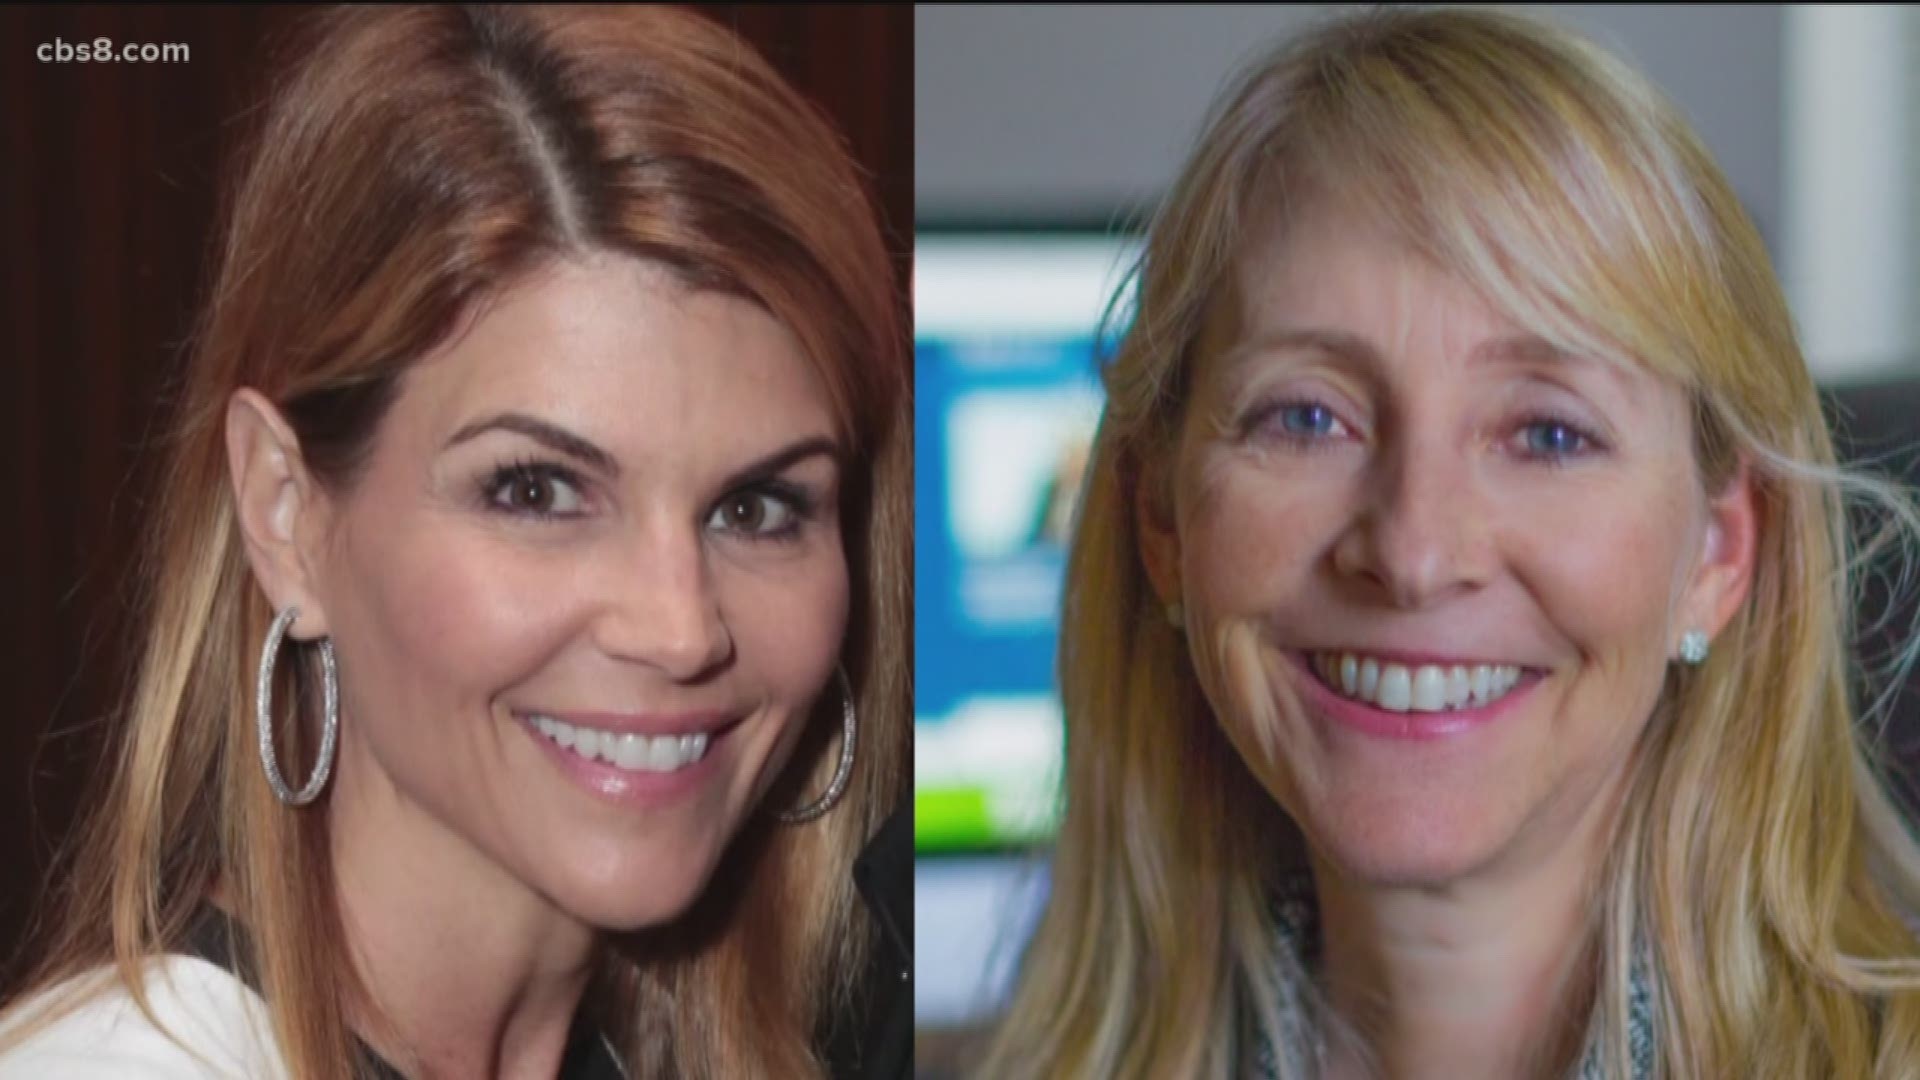 More charges have been filed against parents in the college admissions scandal. Former KFMB stations owner Elisabeth Kimmel is among those facing new charges.